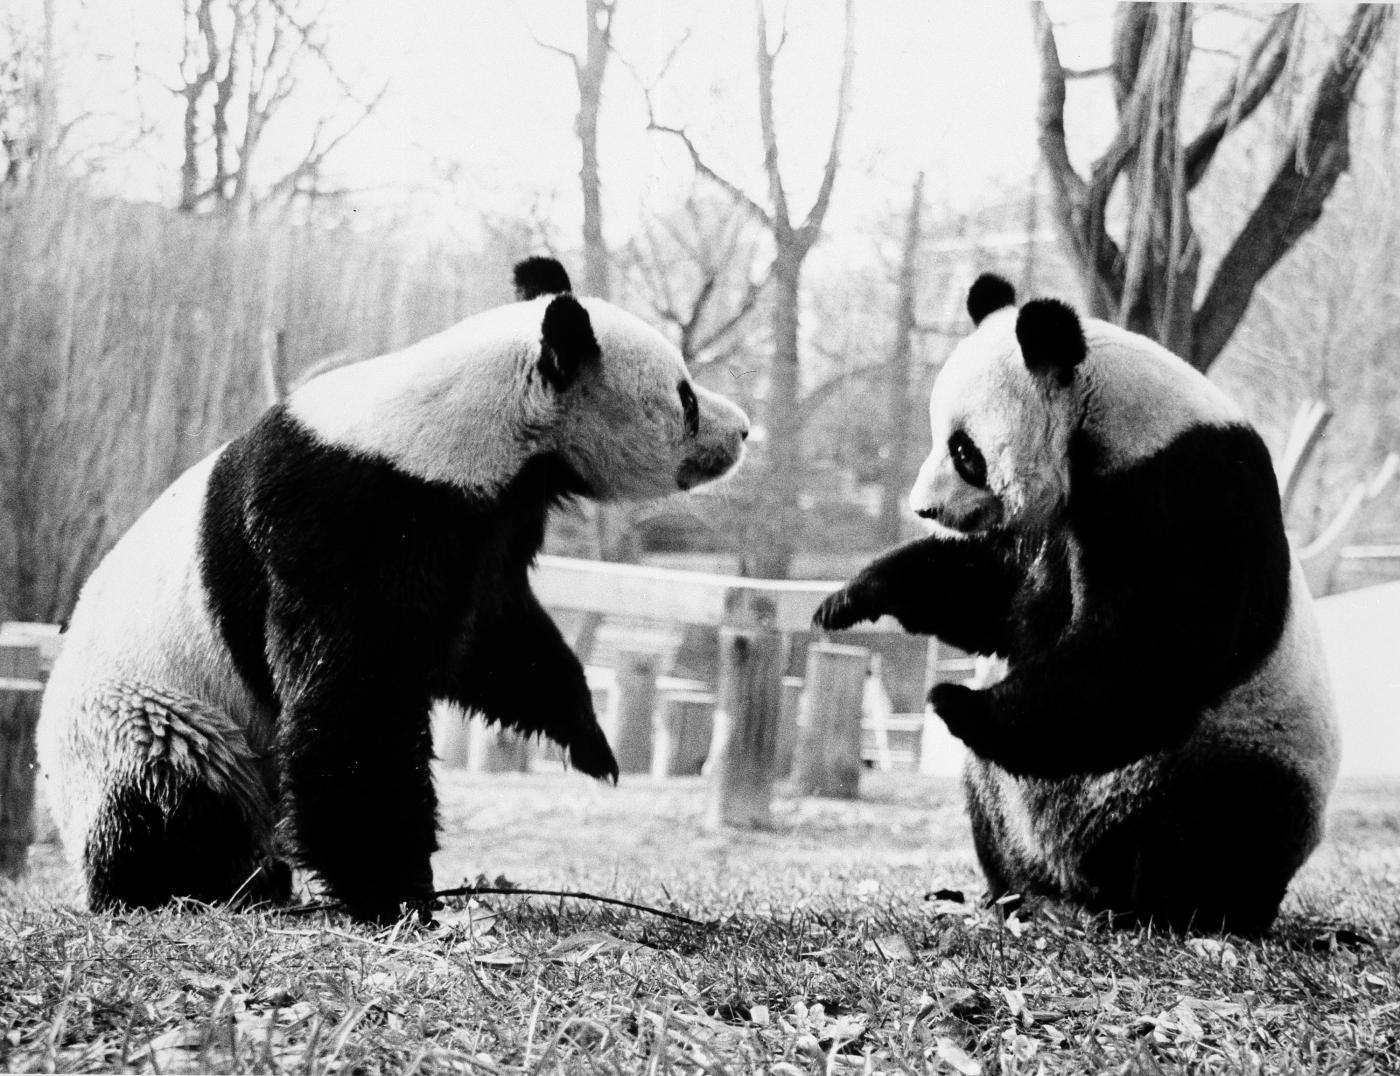 Giant pandas Ling-Ling (left) and Hsing-Hsing (right) spend time together in their outdoor habitat at the Smithsonian’s National Zoo in 1985.